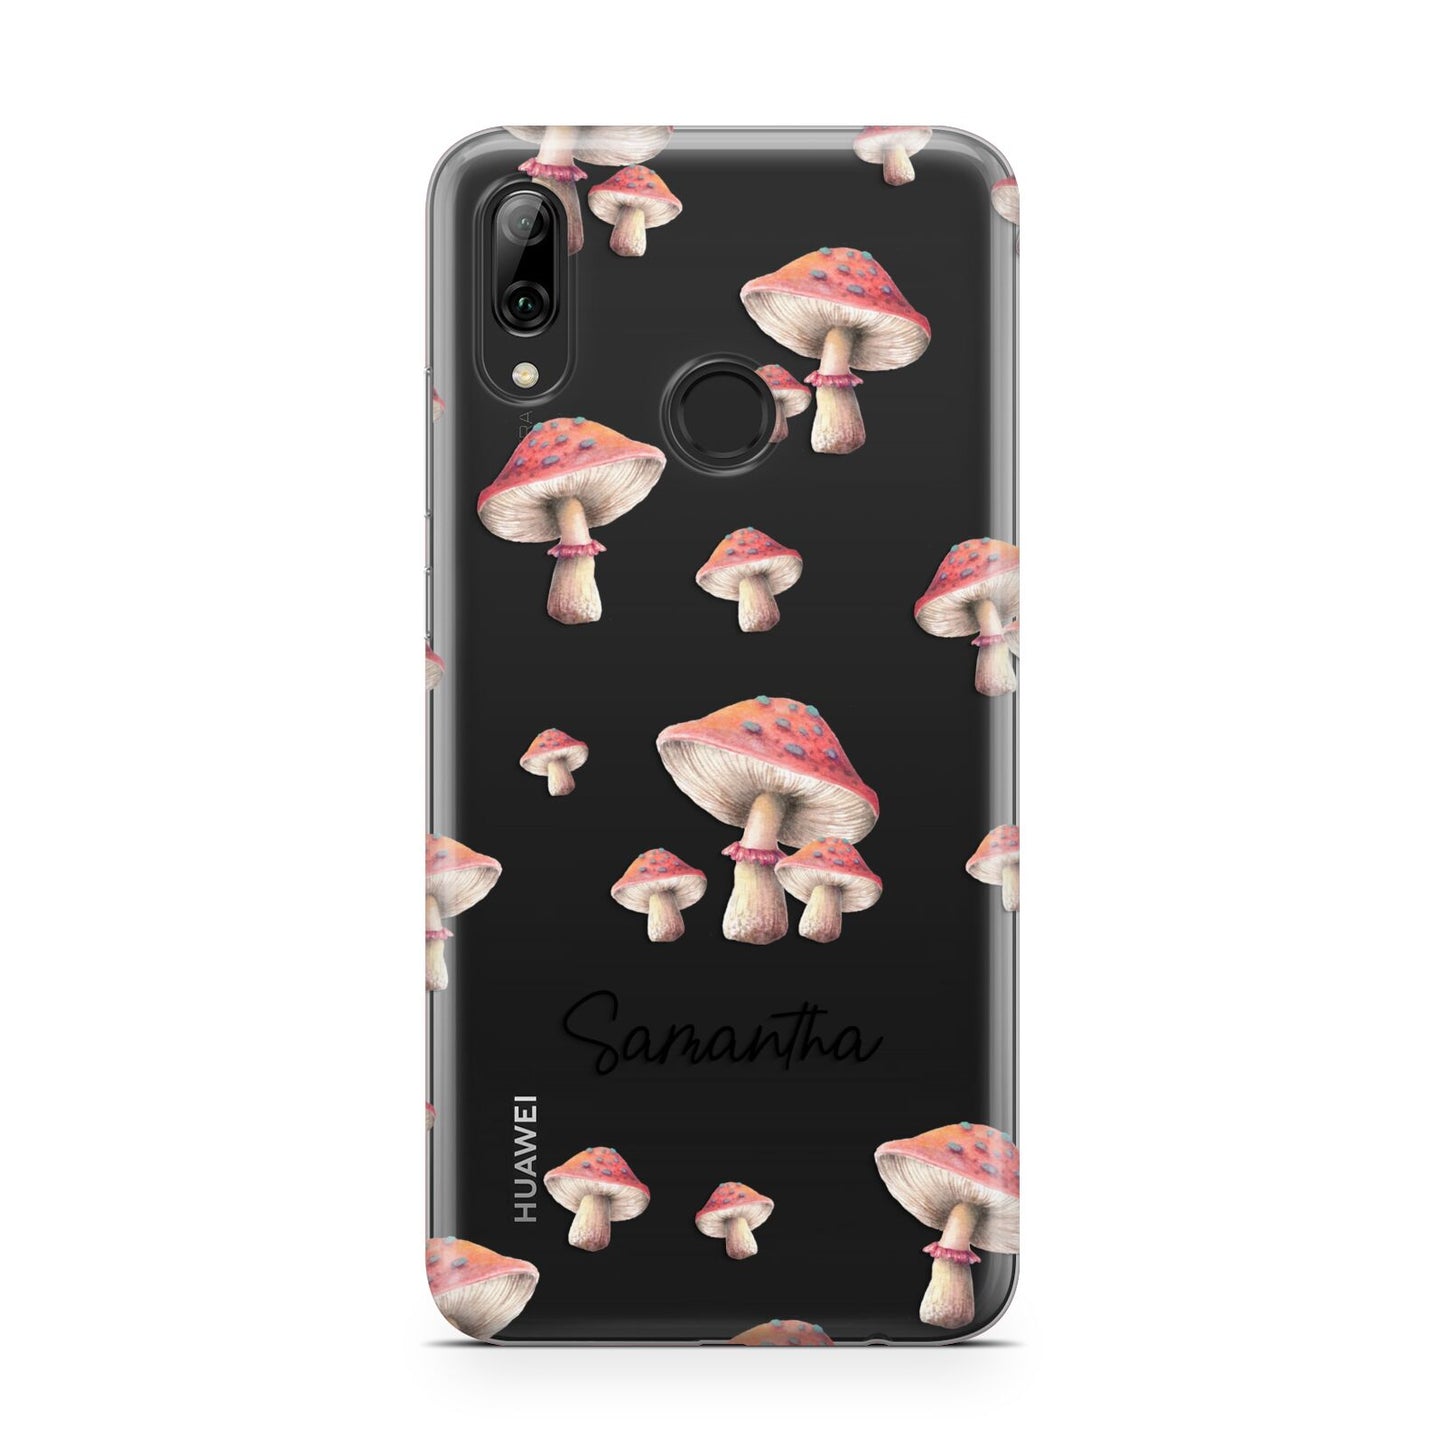 Mushroom Illustrations with Name Huawei Y7 2019